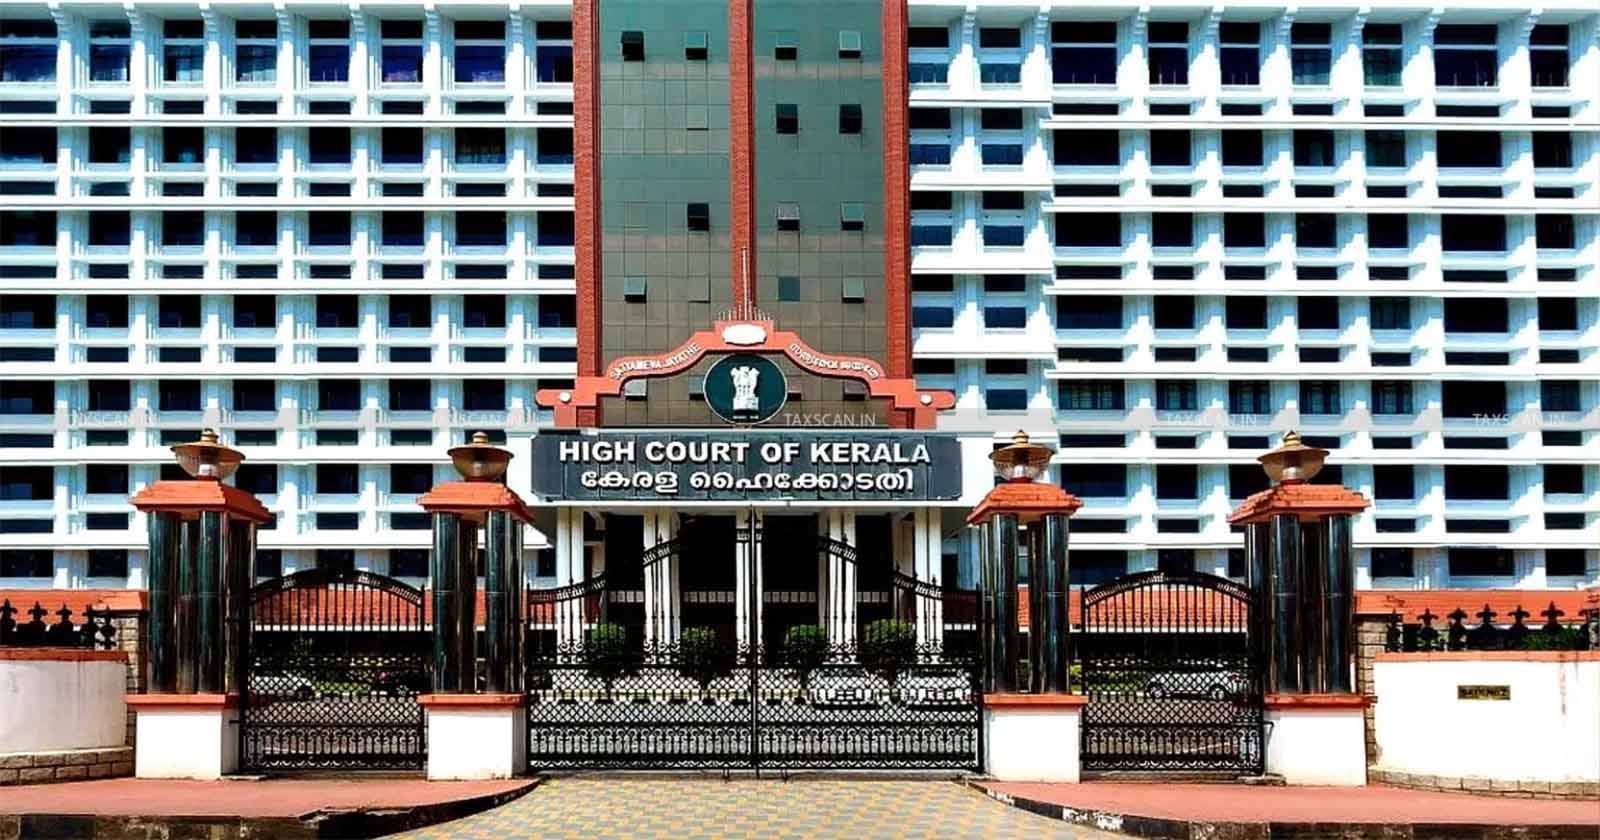 Rejection of Application for Registration - Income Tax Act - Kerala HC - Appear - Commissioner of Income Tax - taxscan